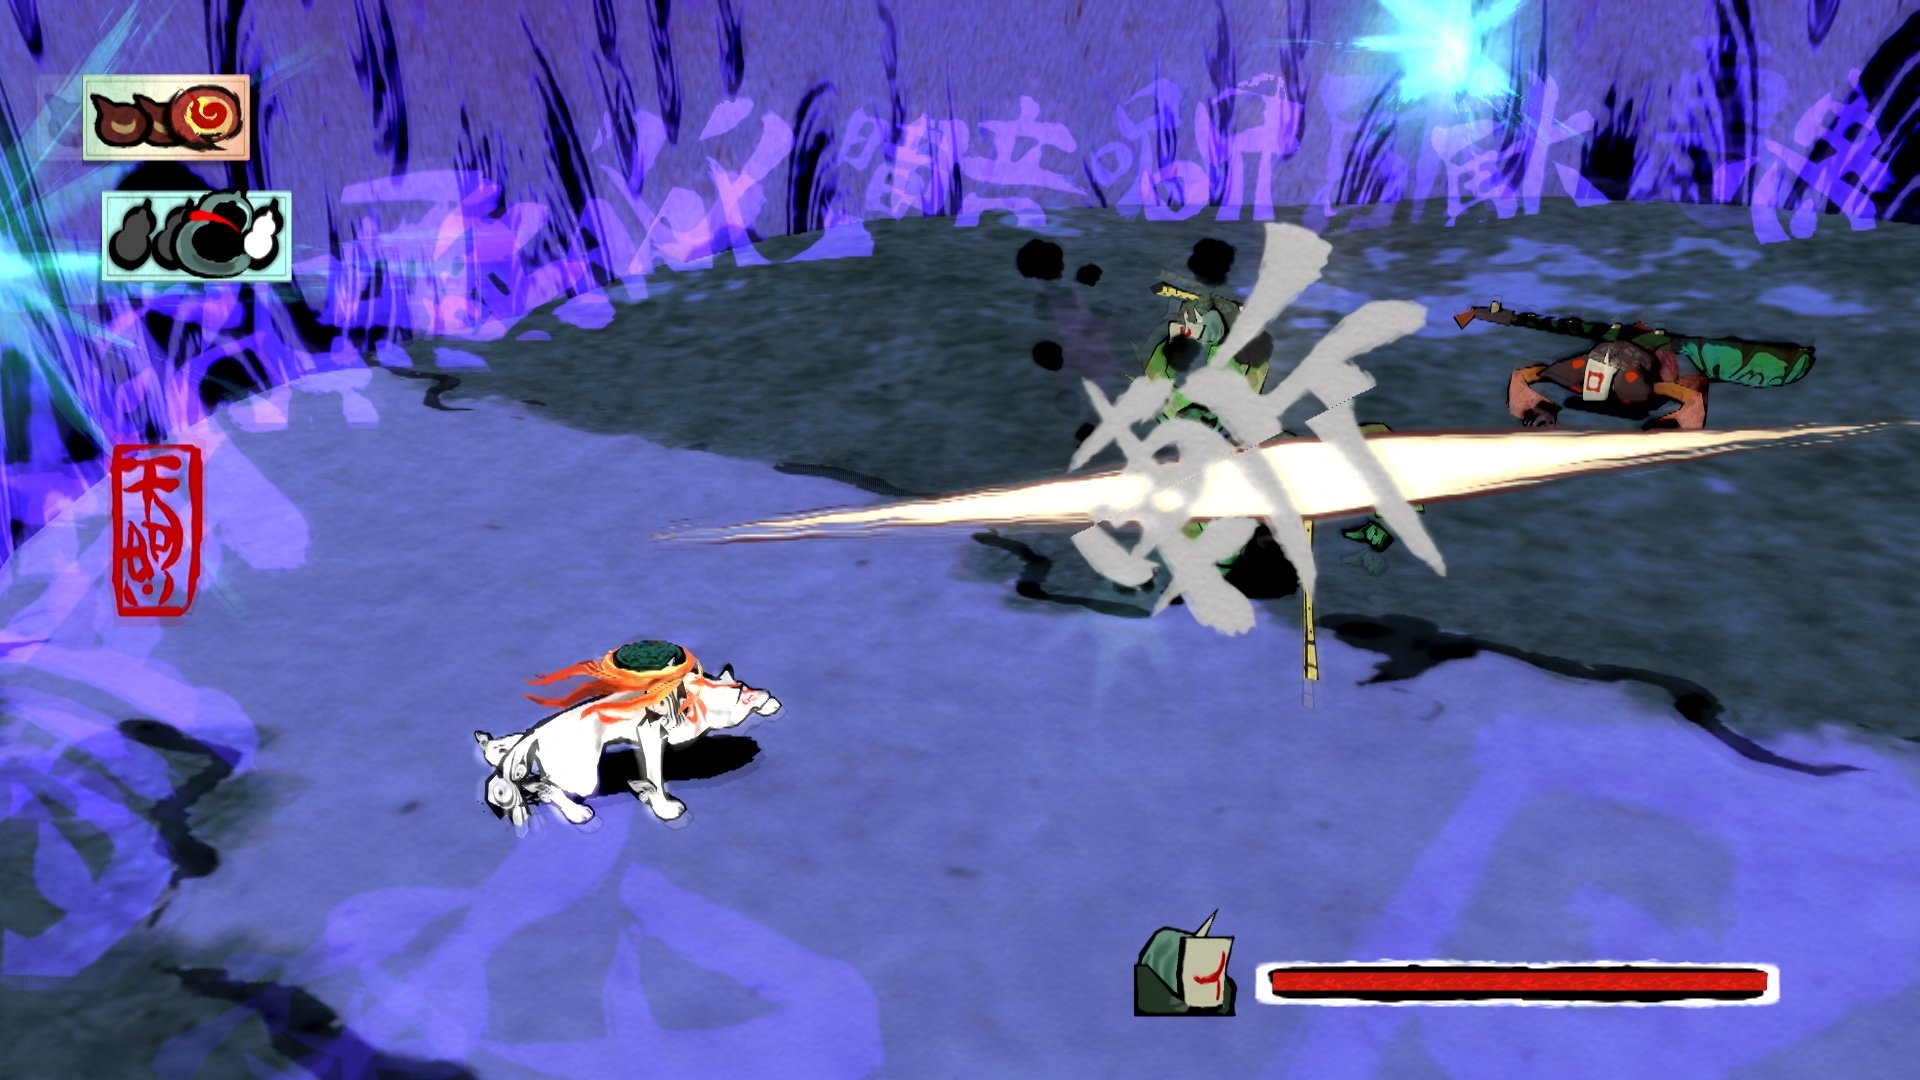 Okami HD confirmed for North America/Europe as digital download  $19.99/£15.99/€19.99, Page 6